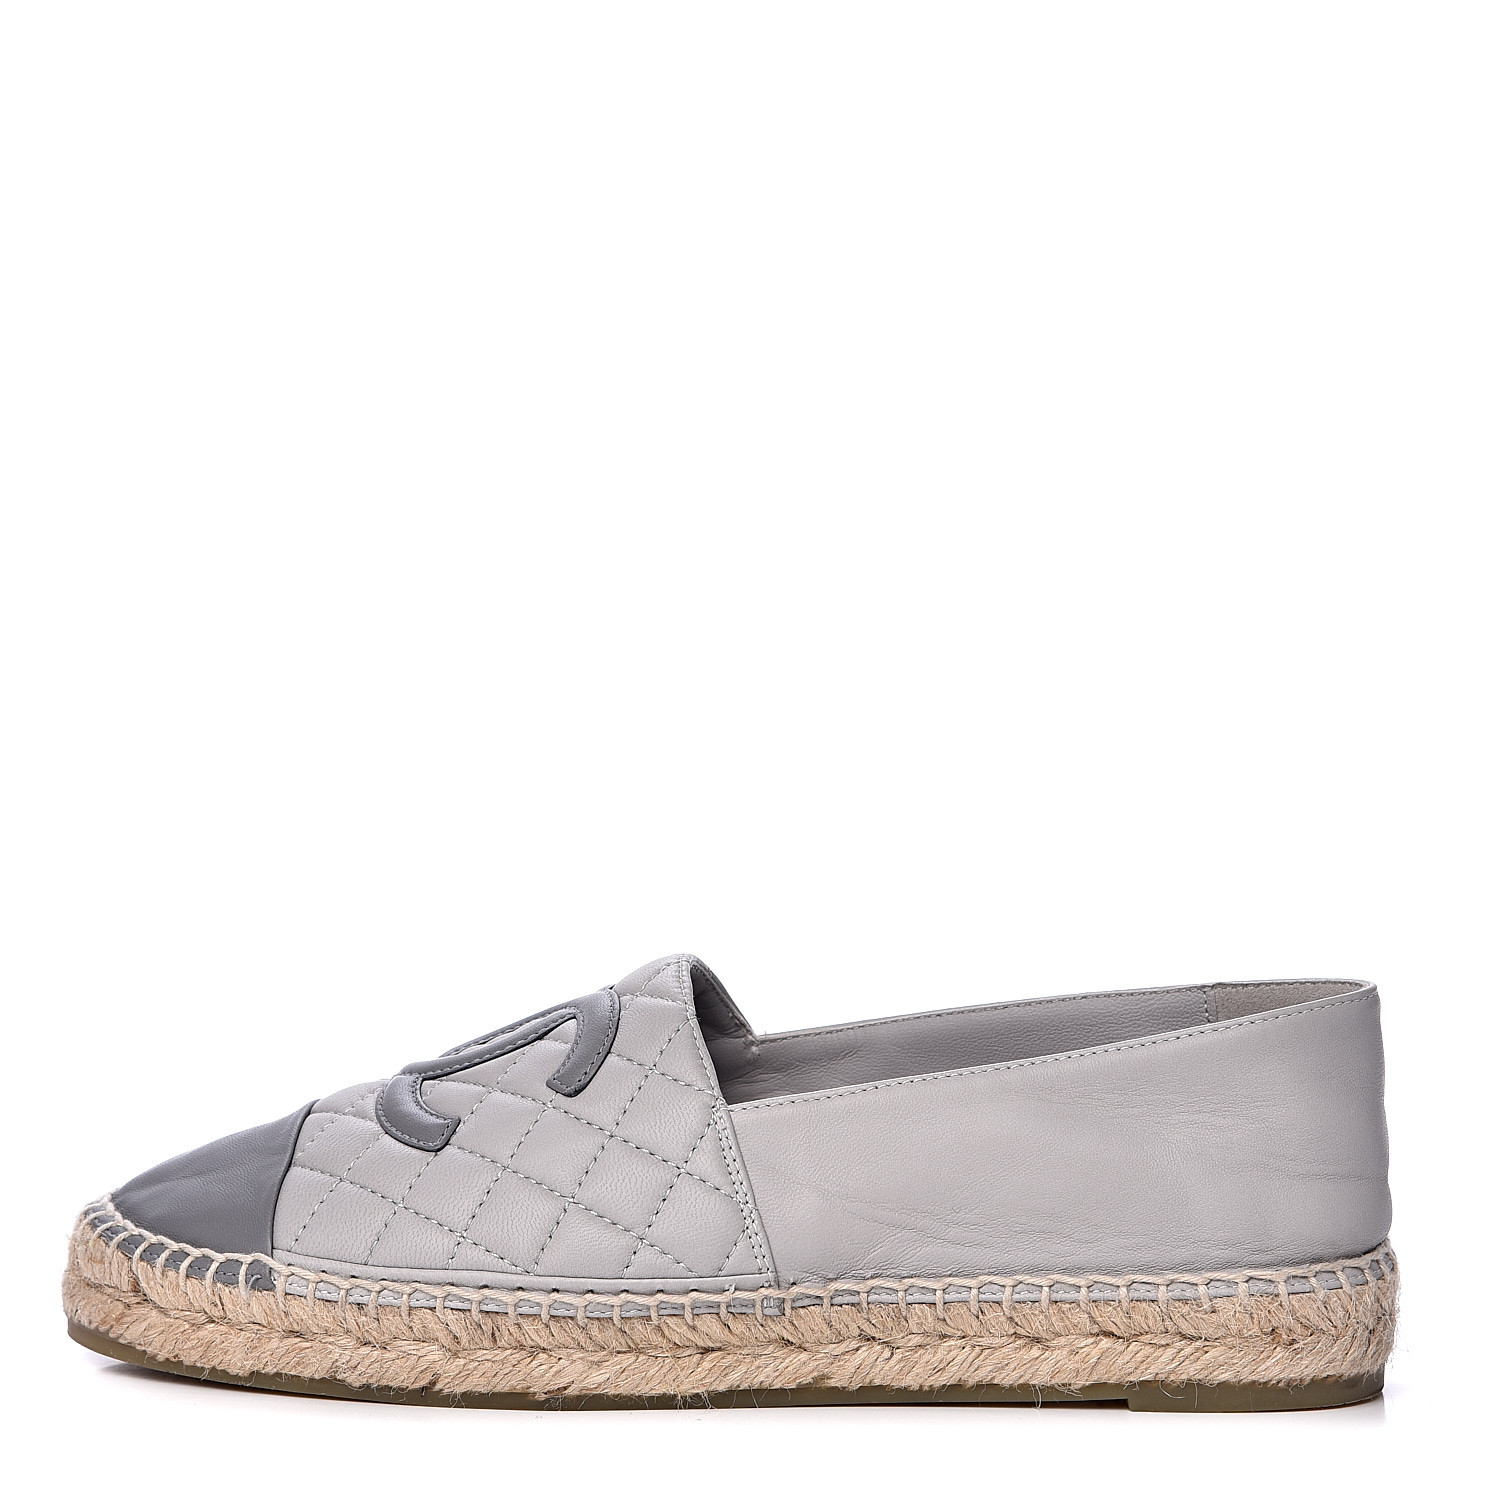 CHANEL Lambskin Quilted CC Espadrilles 